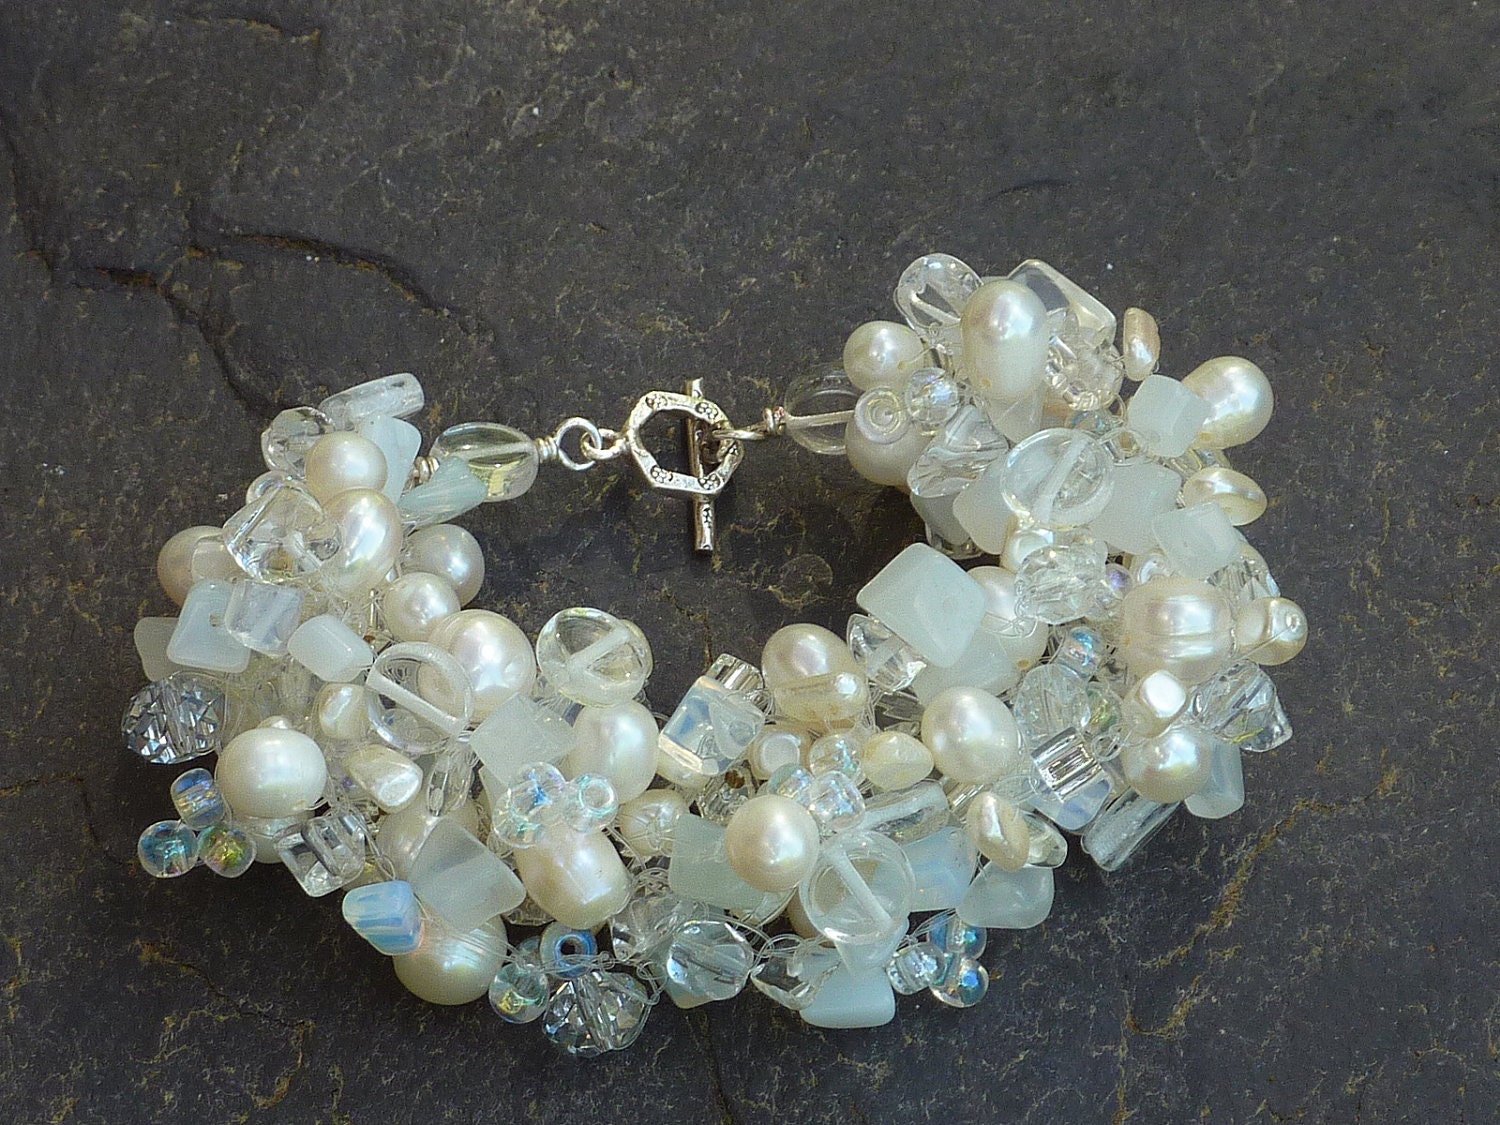 Hand crocheted bracelet with freshwater pearls by violetsparks